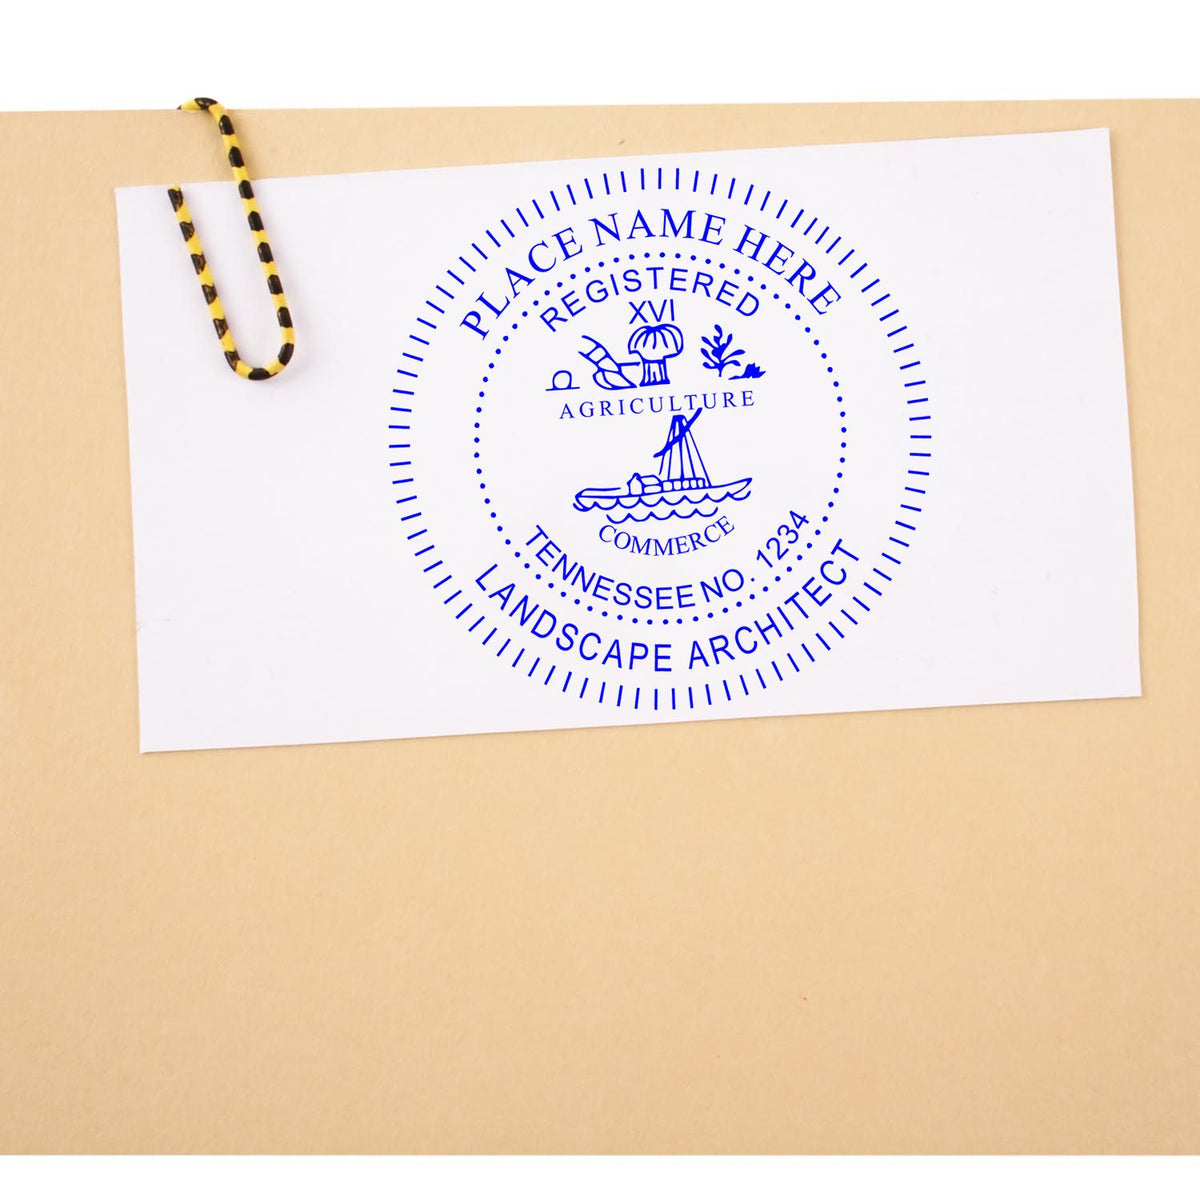 The Premium MaxLight Pre-Inked Tennessee Landscape Architectural Stamp stamp impression comes to life with a crisp, detailed photo on paper - showcasing true professional quality.